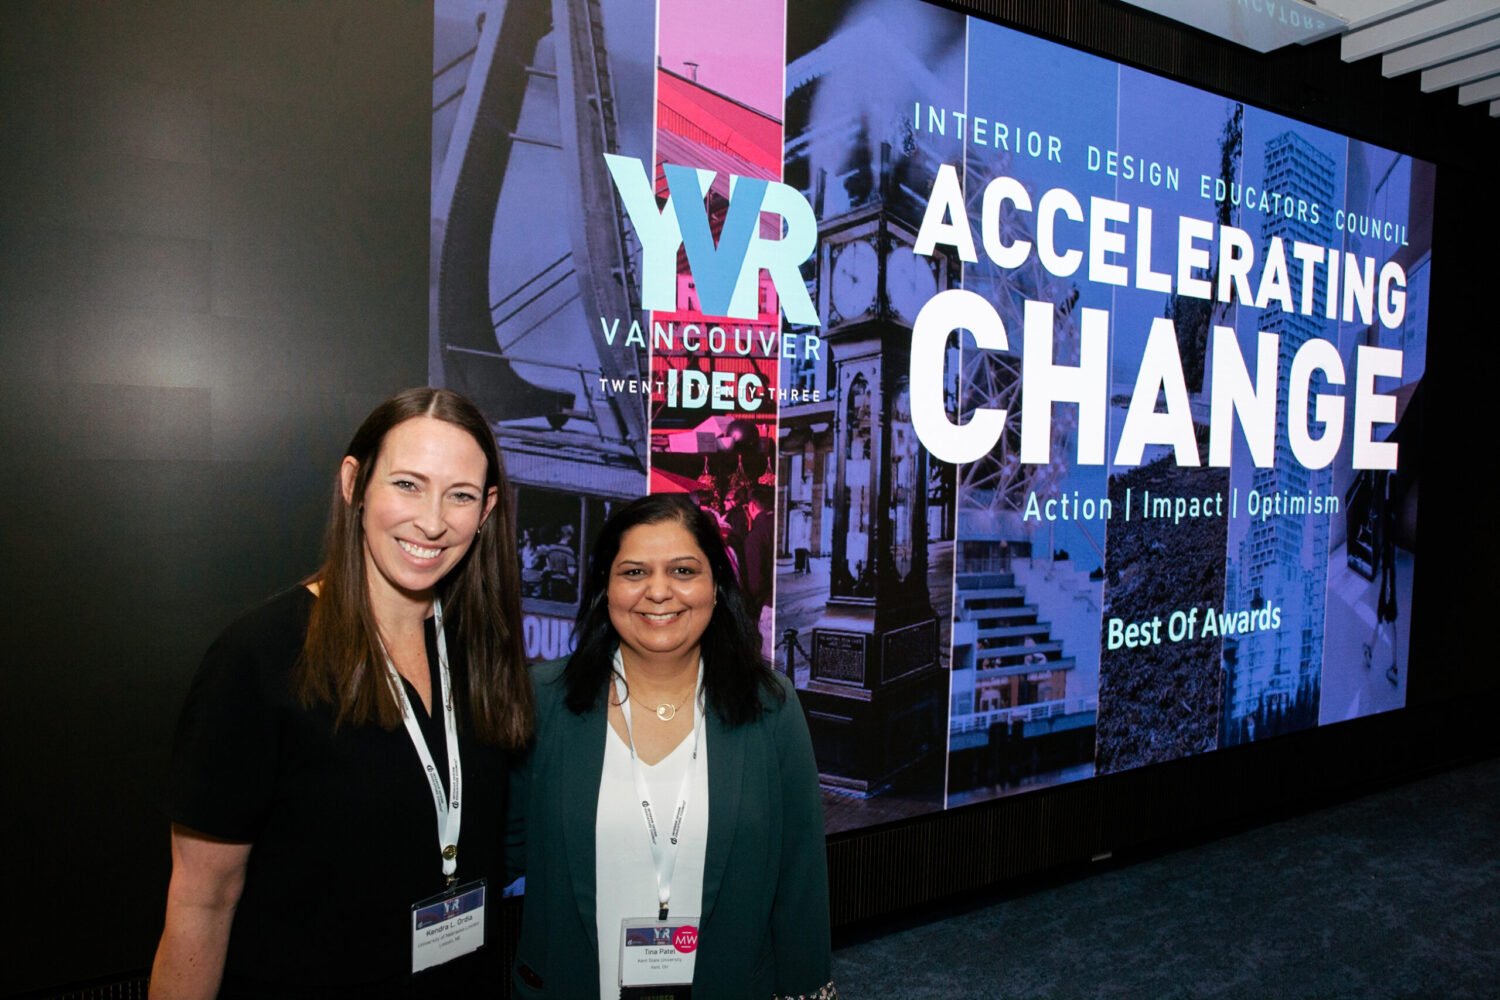 Two women smiling in front of Accelerating Change conference banner.